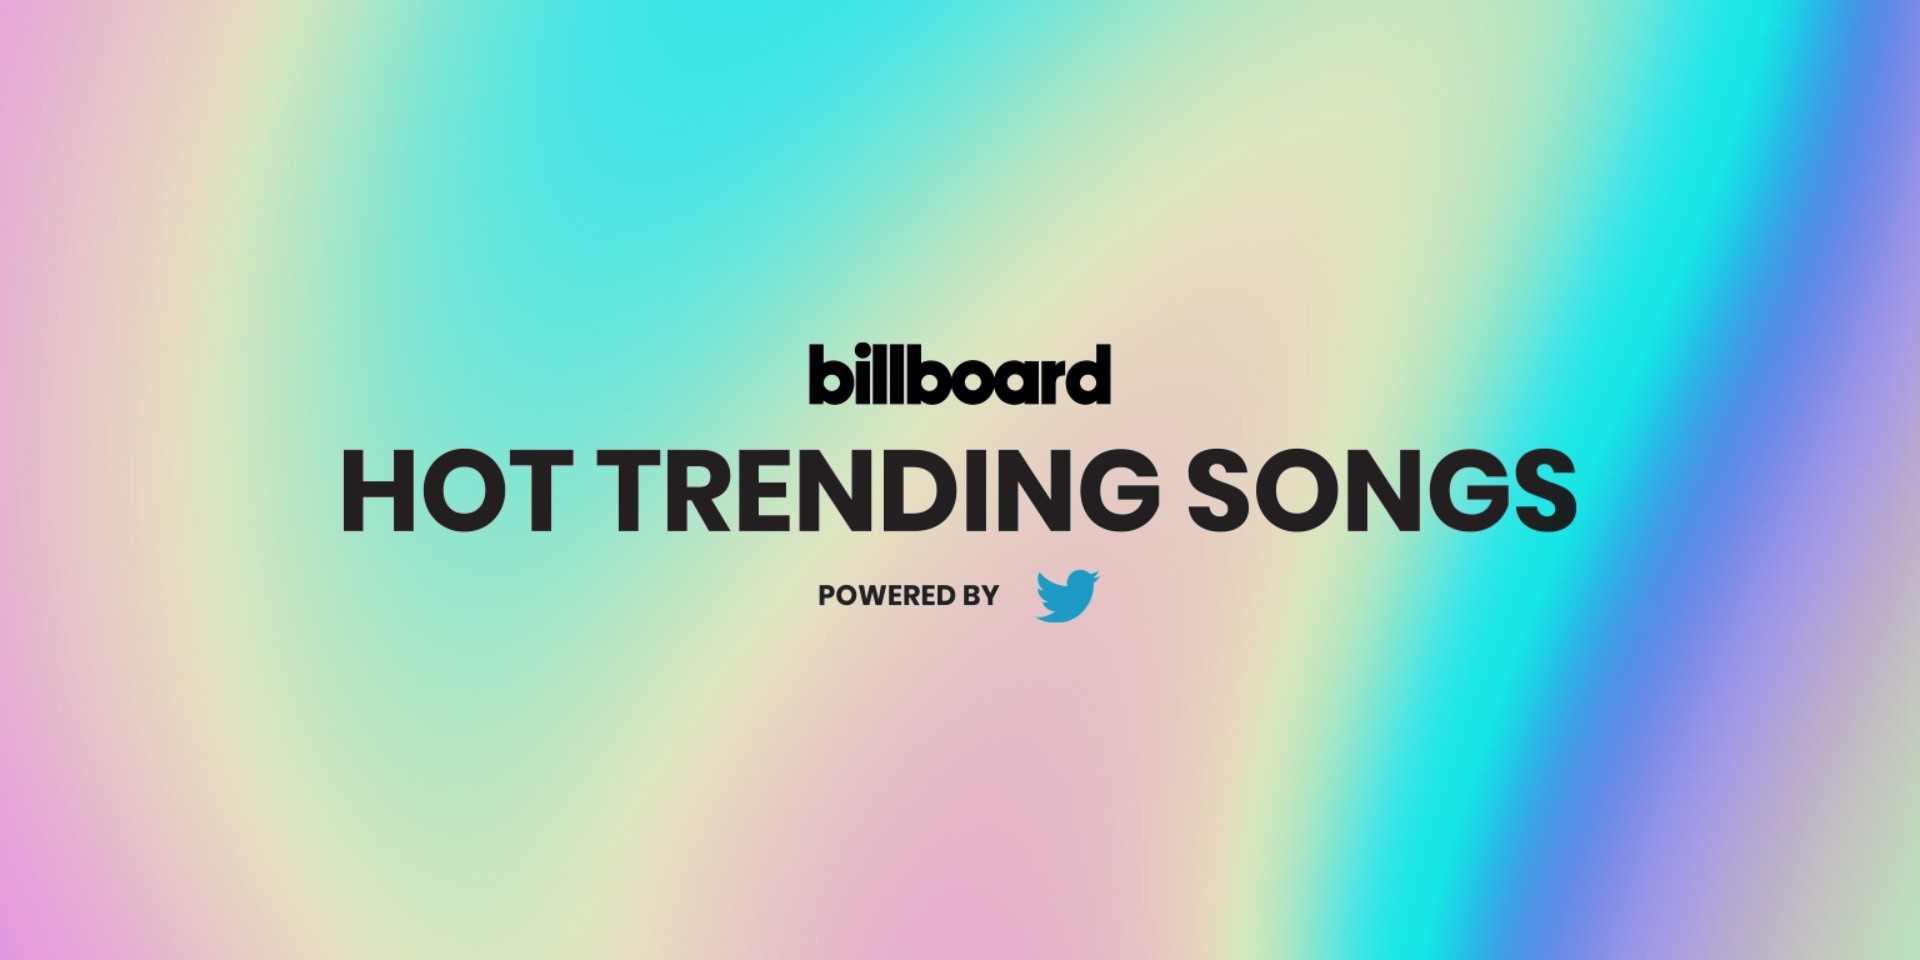 Twitter partners with Billboard for new Hot Trending Songs chart